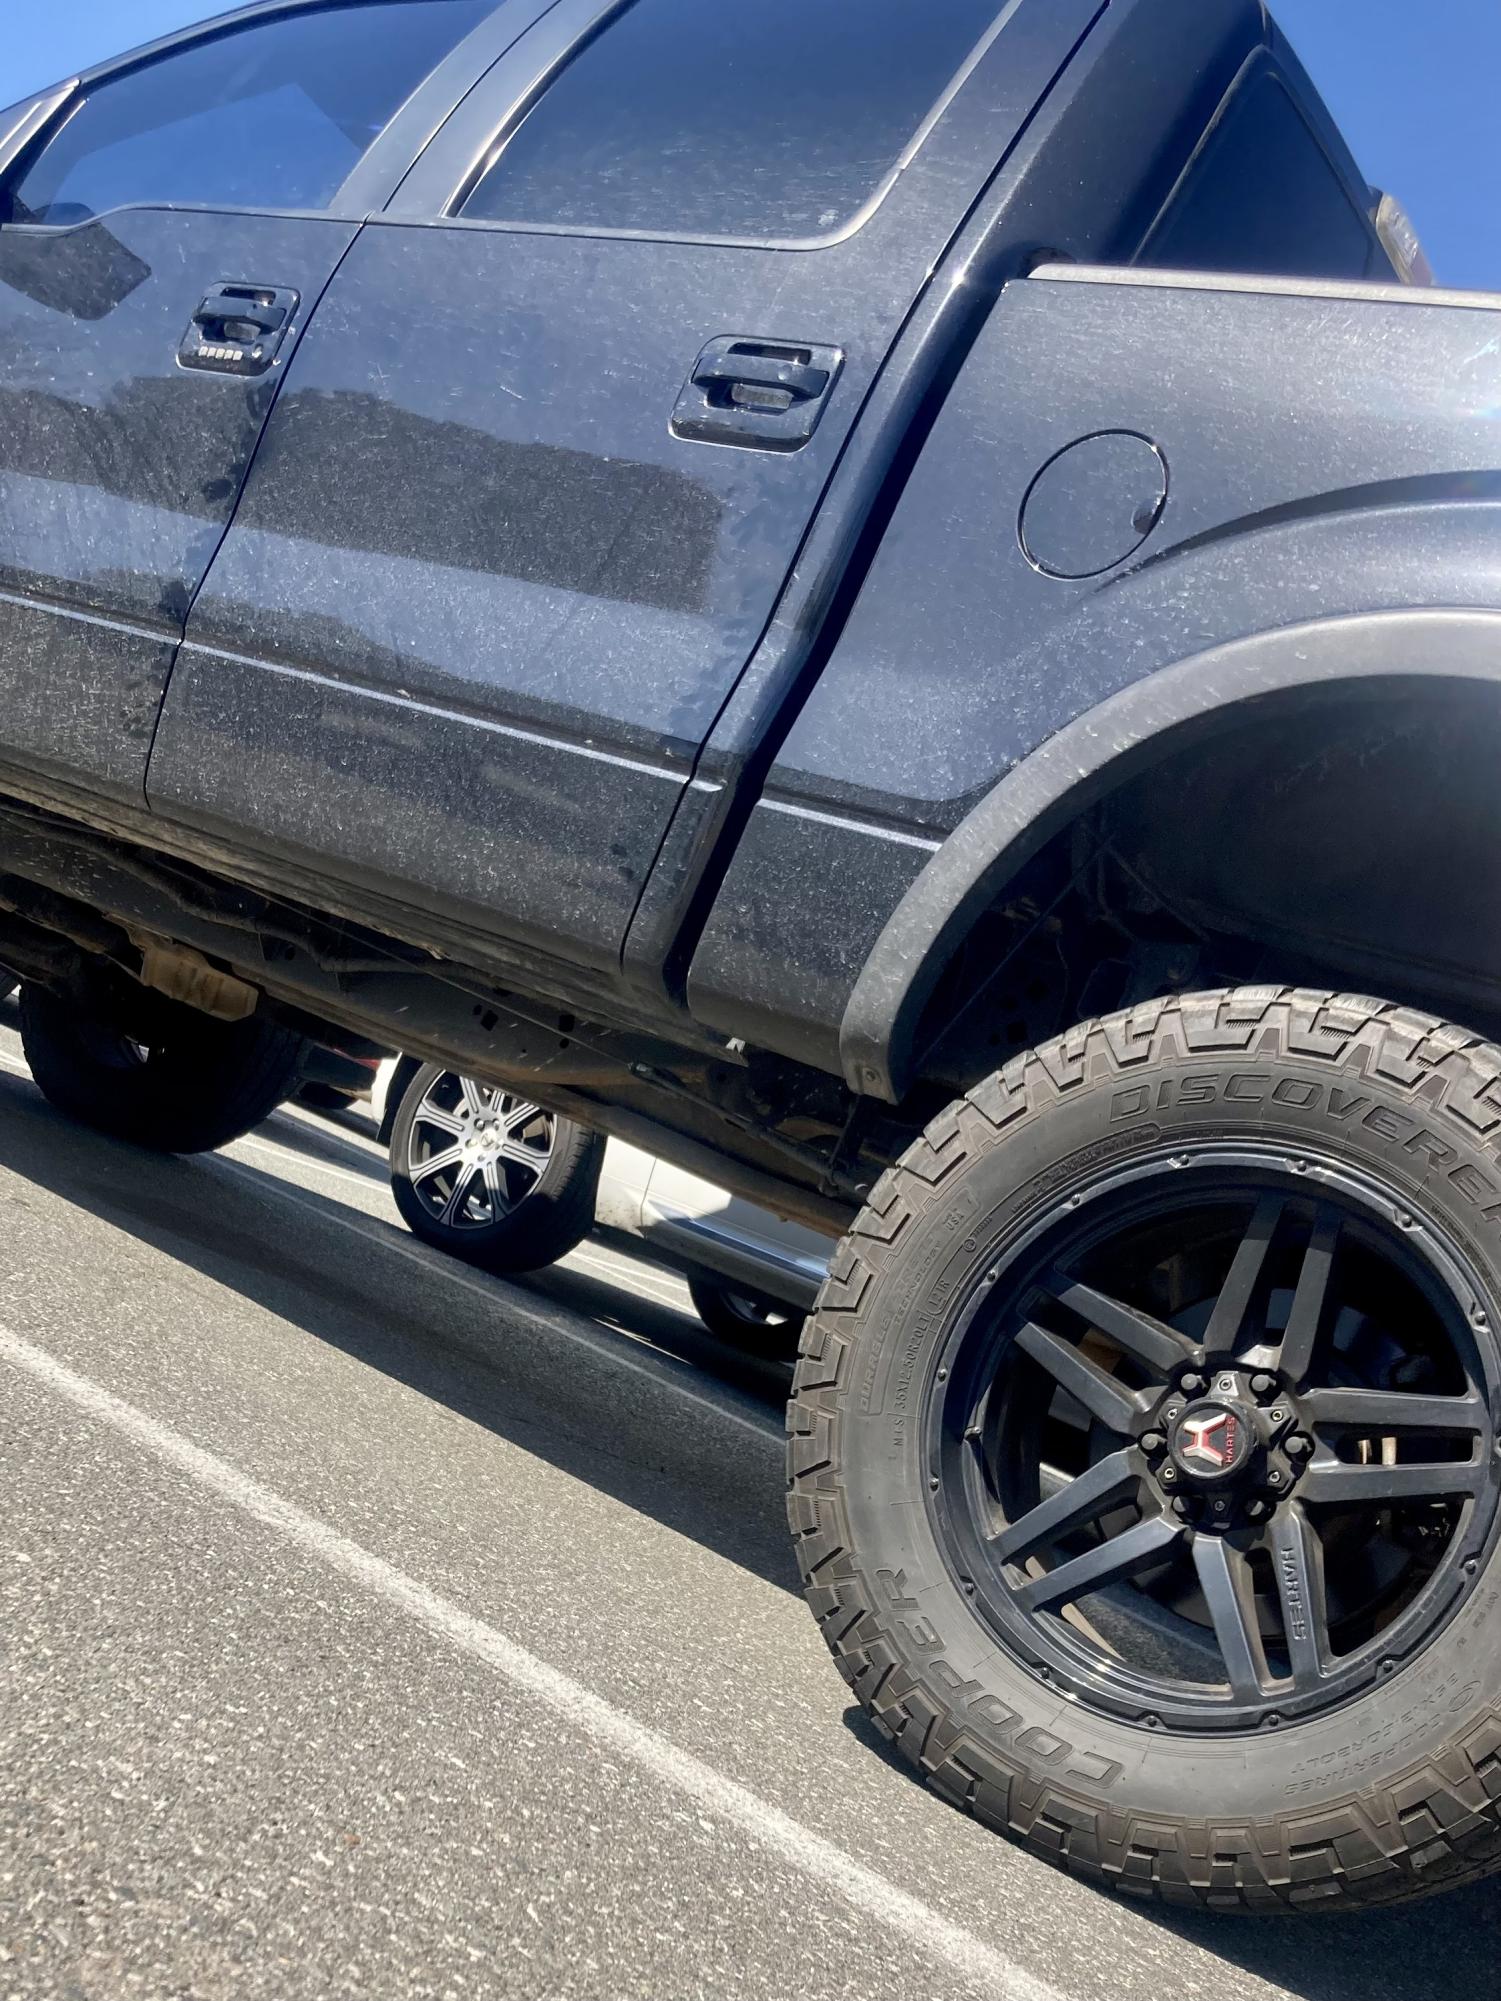 With a lift and some bigger tires and rims, Cullin Finnerty’s (‘26) truck serves the purpose with a bit of added style.
